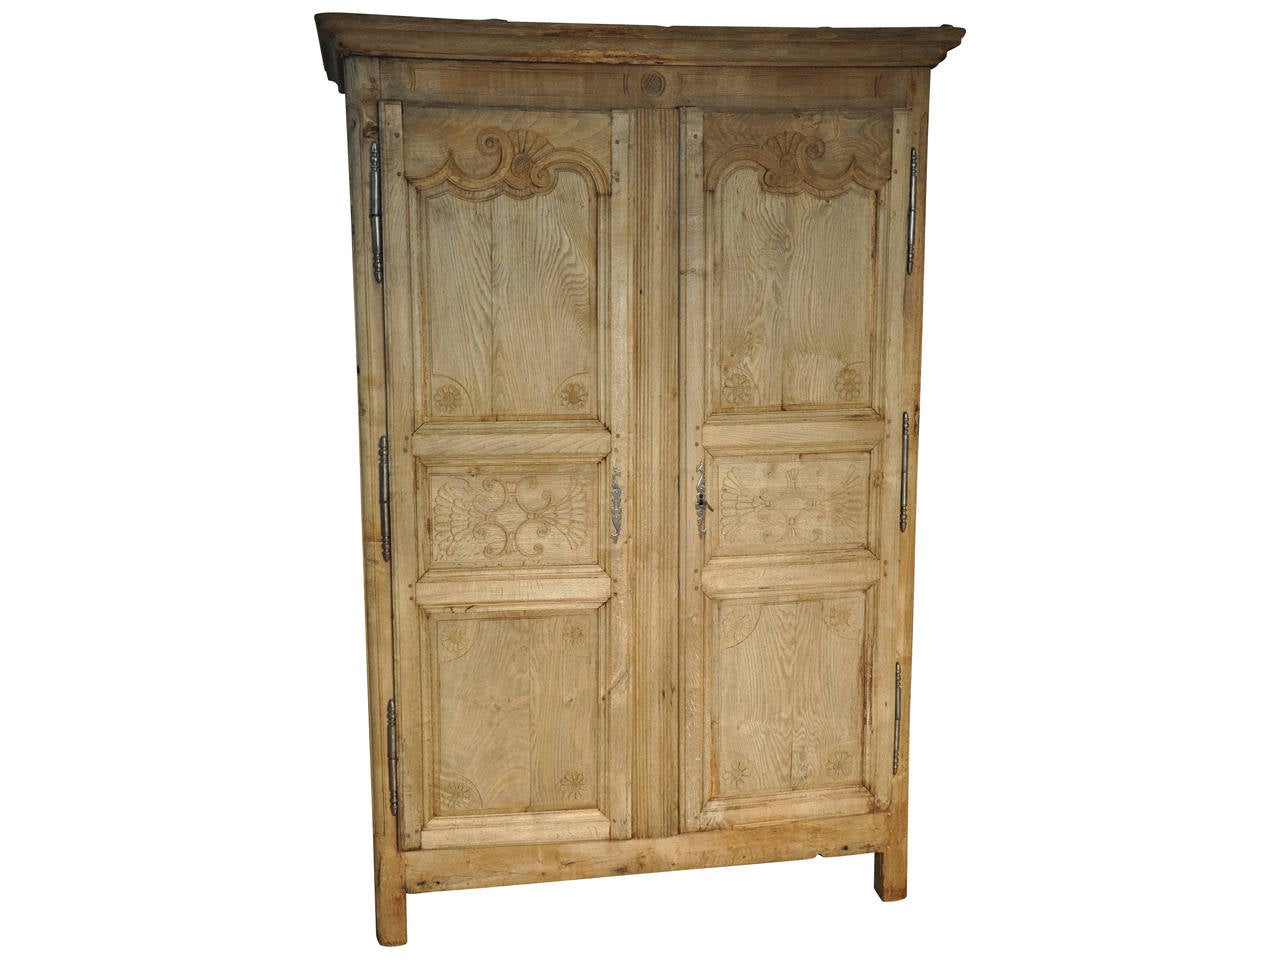 A very handsome 18th century Louis XIV style armoire in bleached oak from the South of France.  This delightful armoire has charming carving detail to the door panels.  It is an excellent storage piece and also wonderful to outfit as a bar or